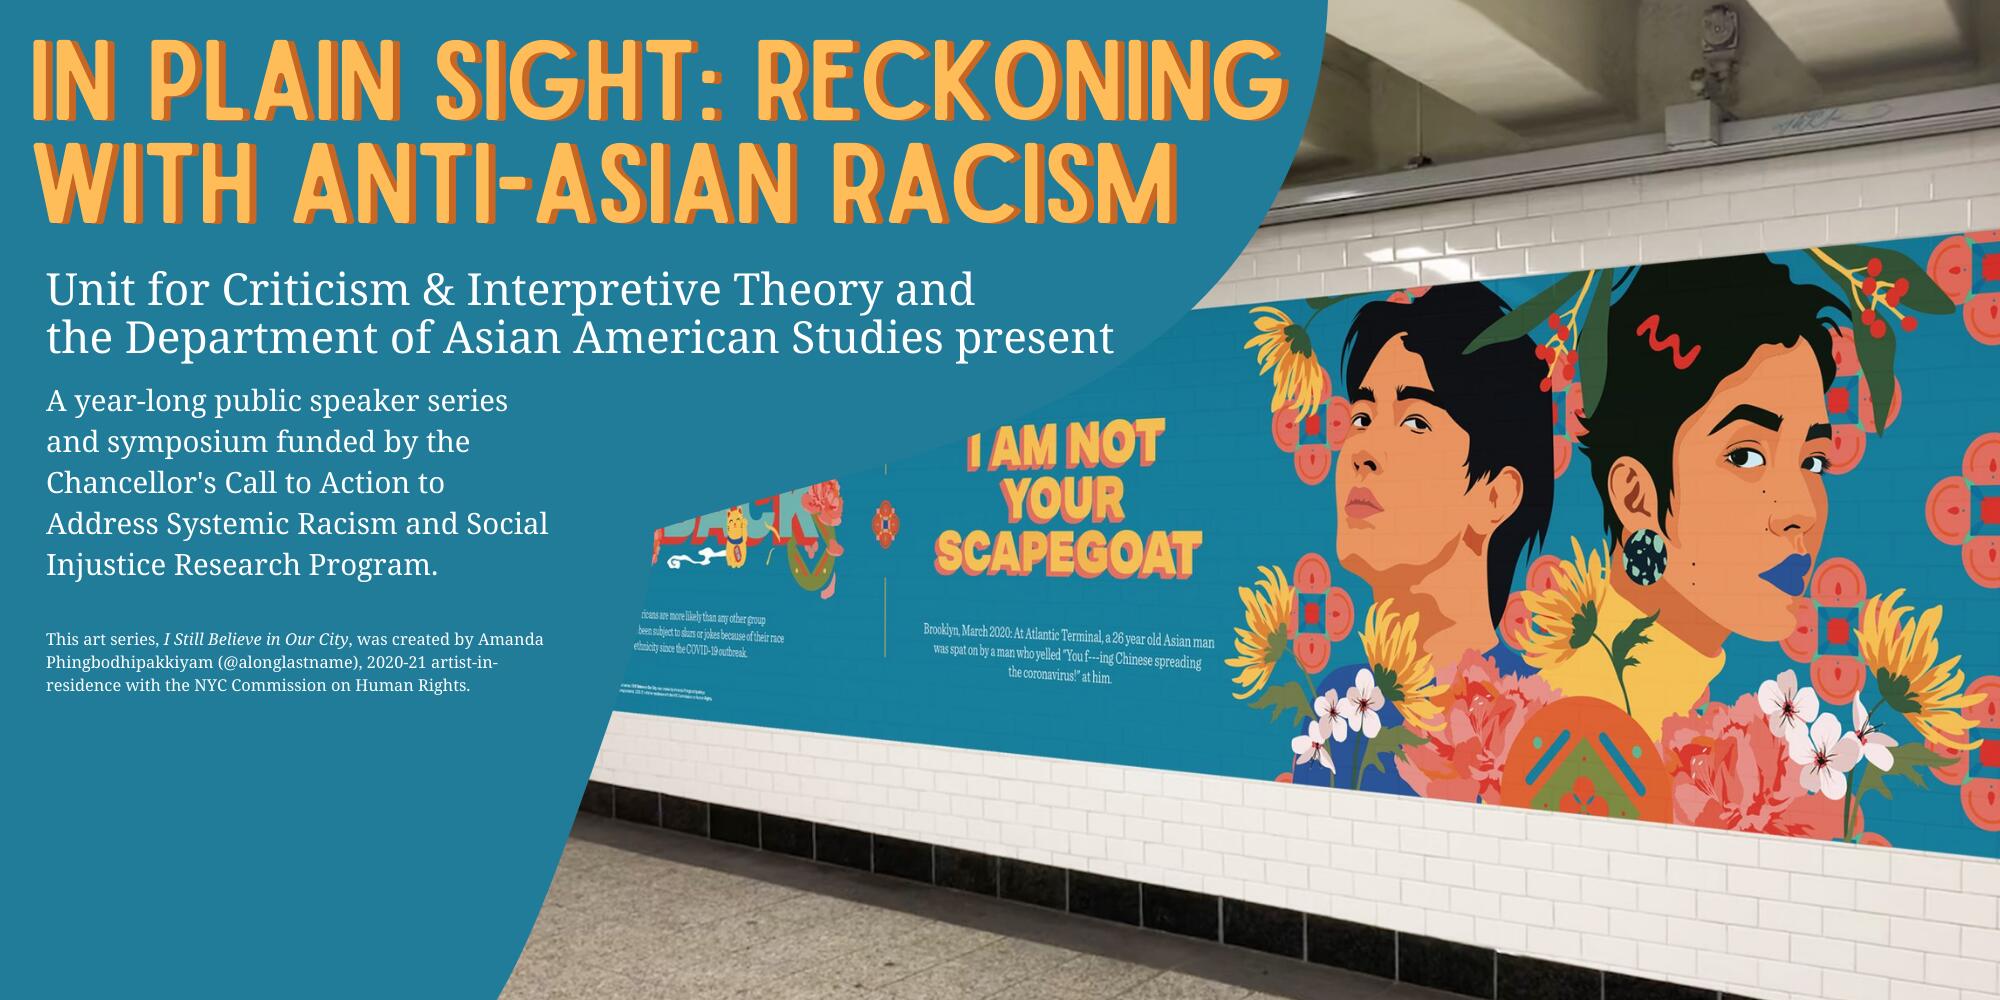 Flyer for the event. Image shows a mural in a subway station of two Asian people. Text on the mural reads "I am not your scapegoat."